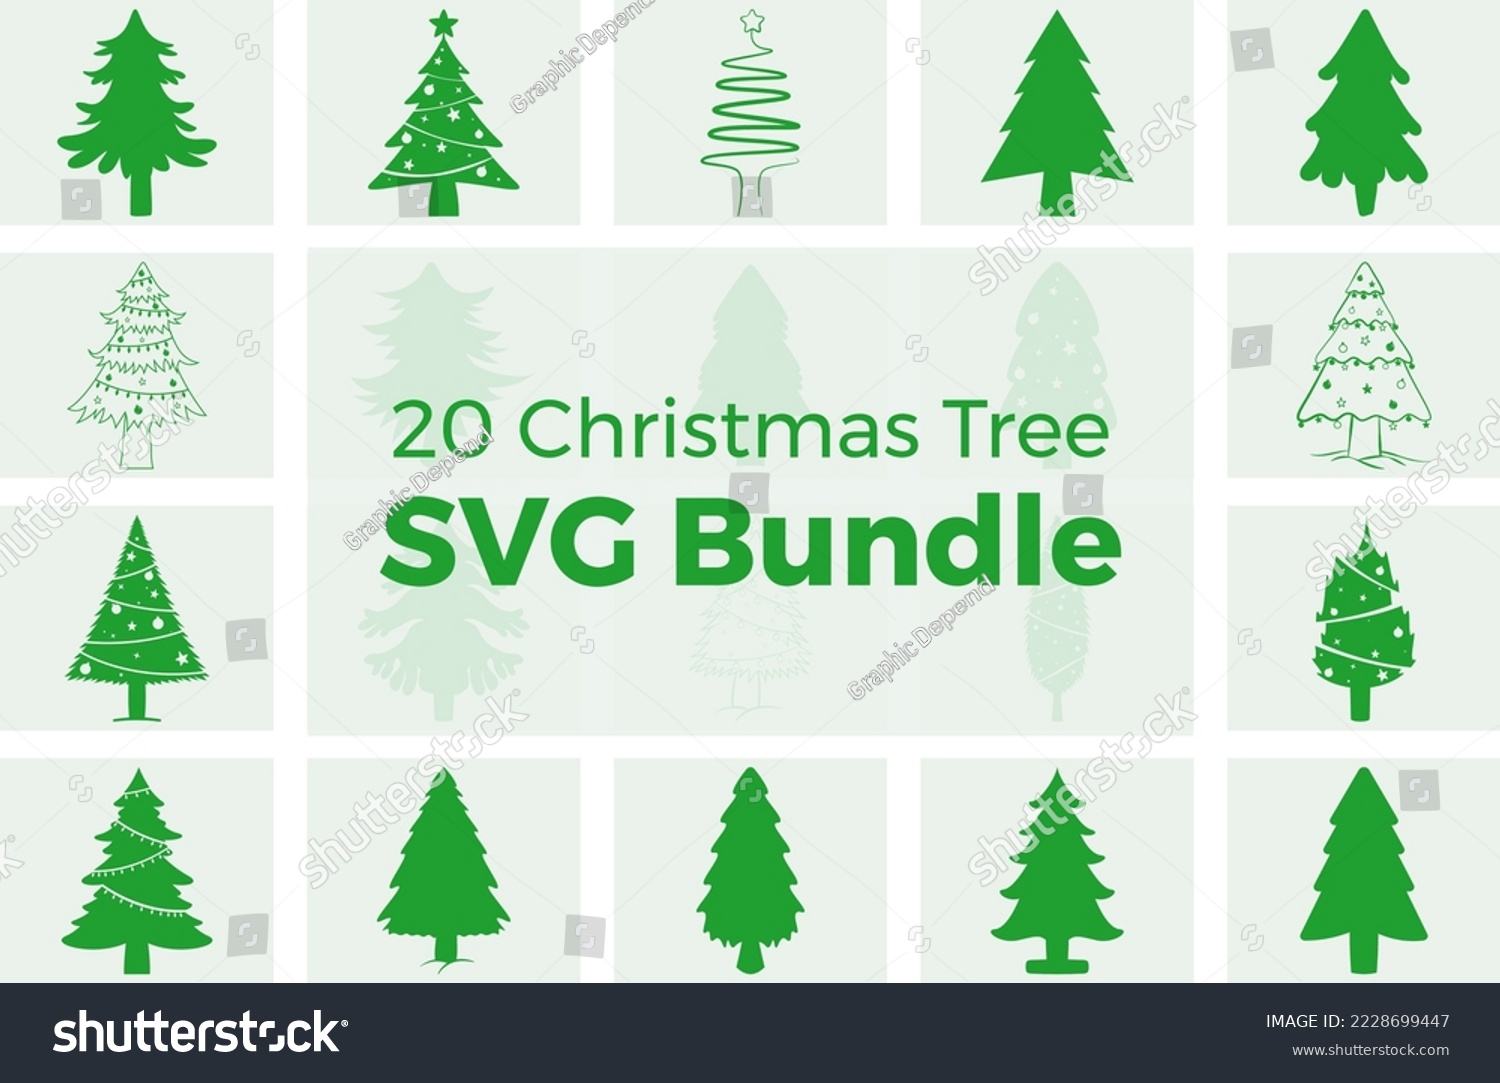 SVG of christmas tree svg, christmas tree svg bundle can be used for t-shirt, mug, pattern, christmas tree stickers, christmas tree png svg